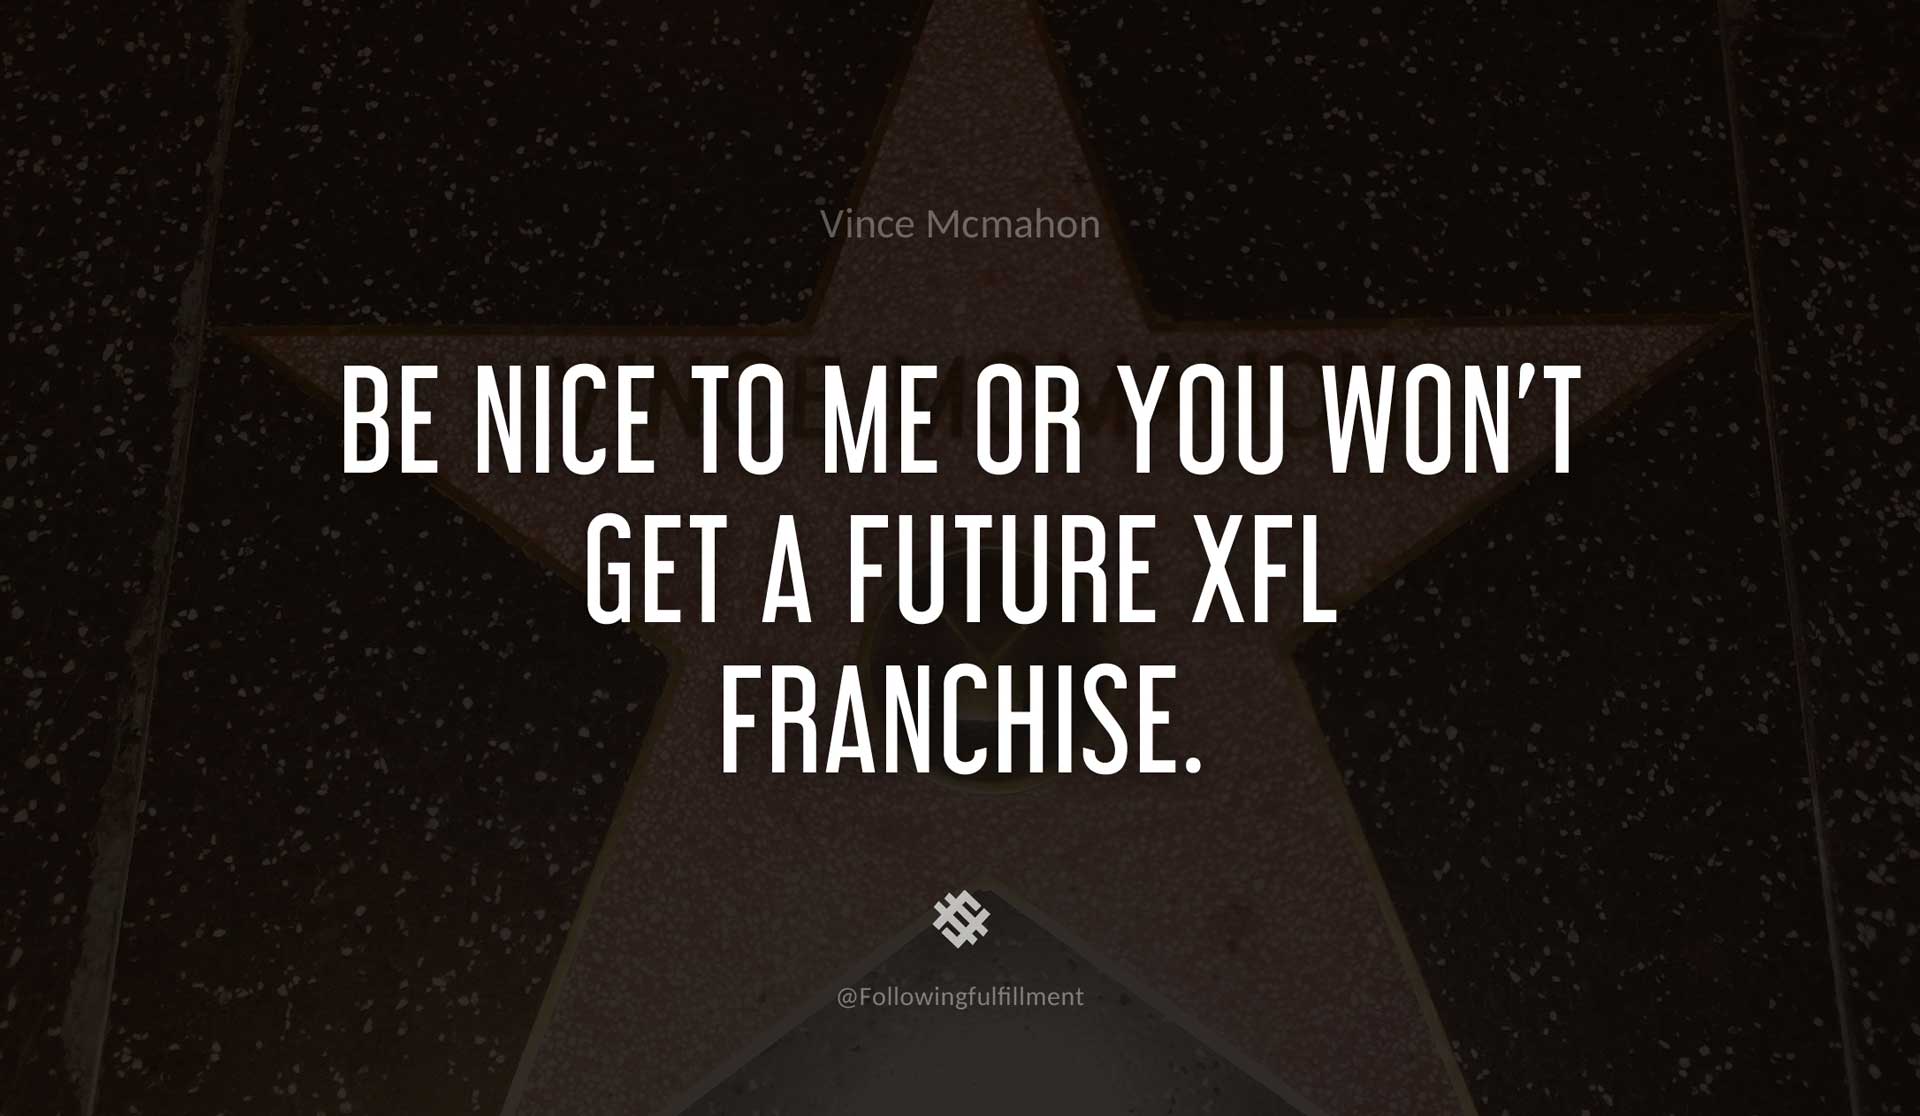 Be-nice-to-me-or-you-won't-get-a-future-XFL-franchise.-VINCE-MCMAHON-Quote.jpg